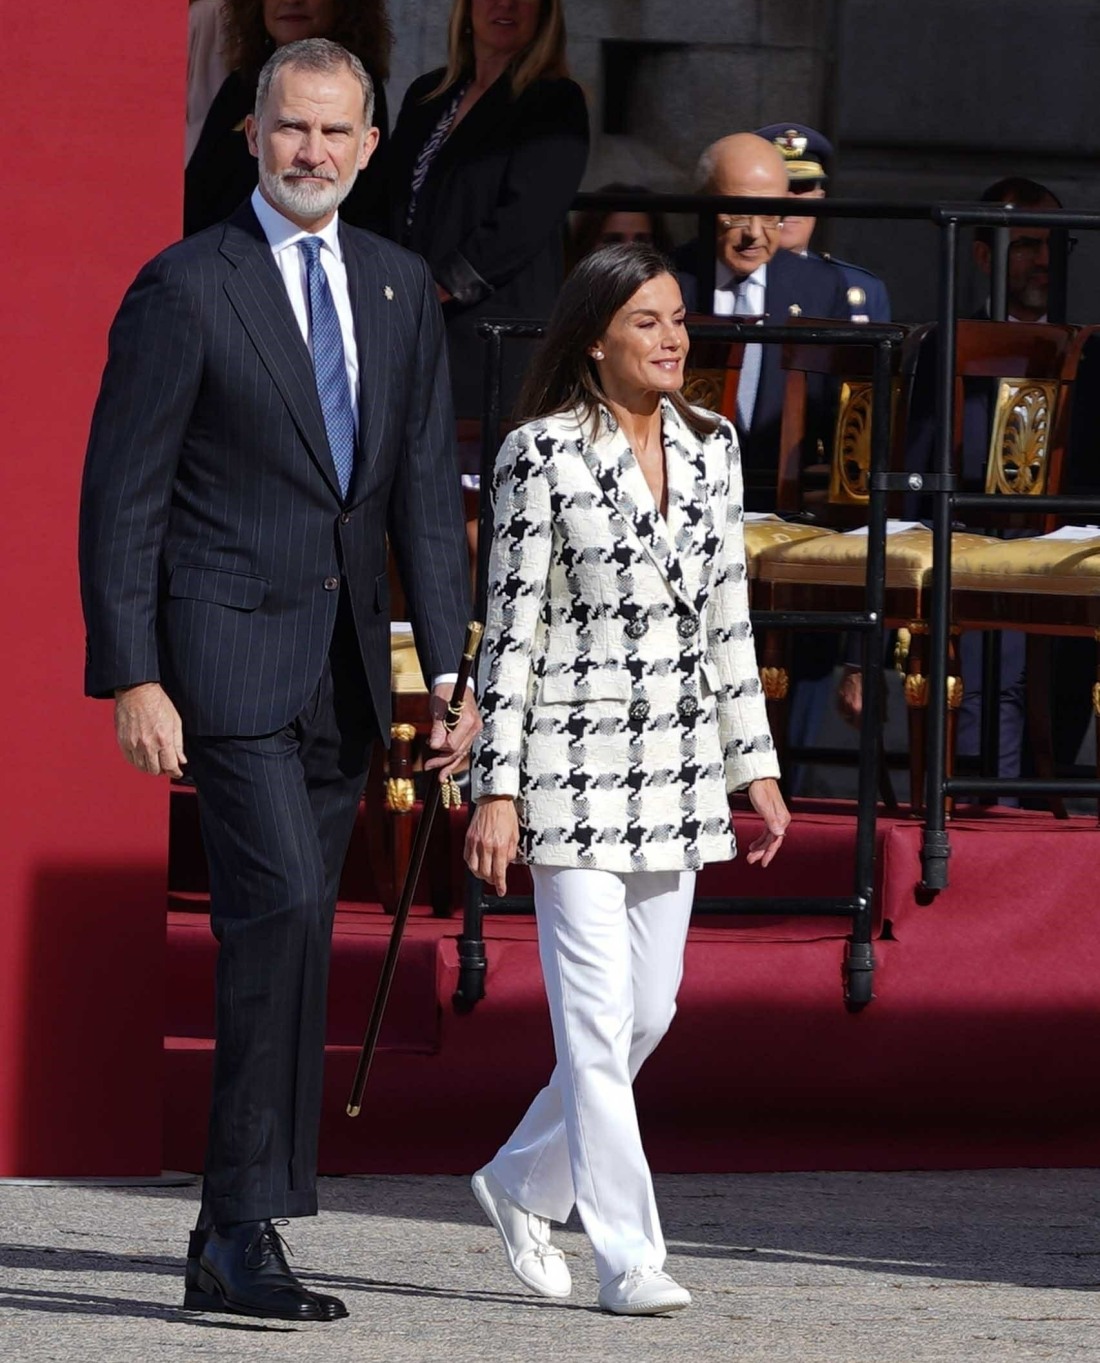 Queen Letizia has a fractured toe, so now she’s wearing sneakers to events